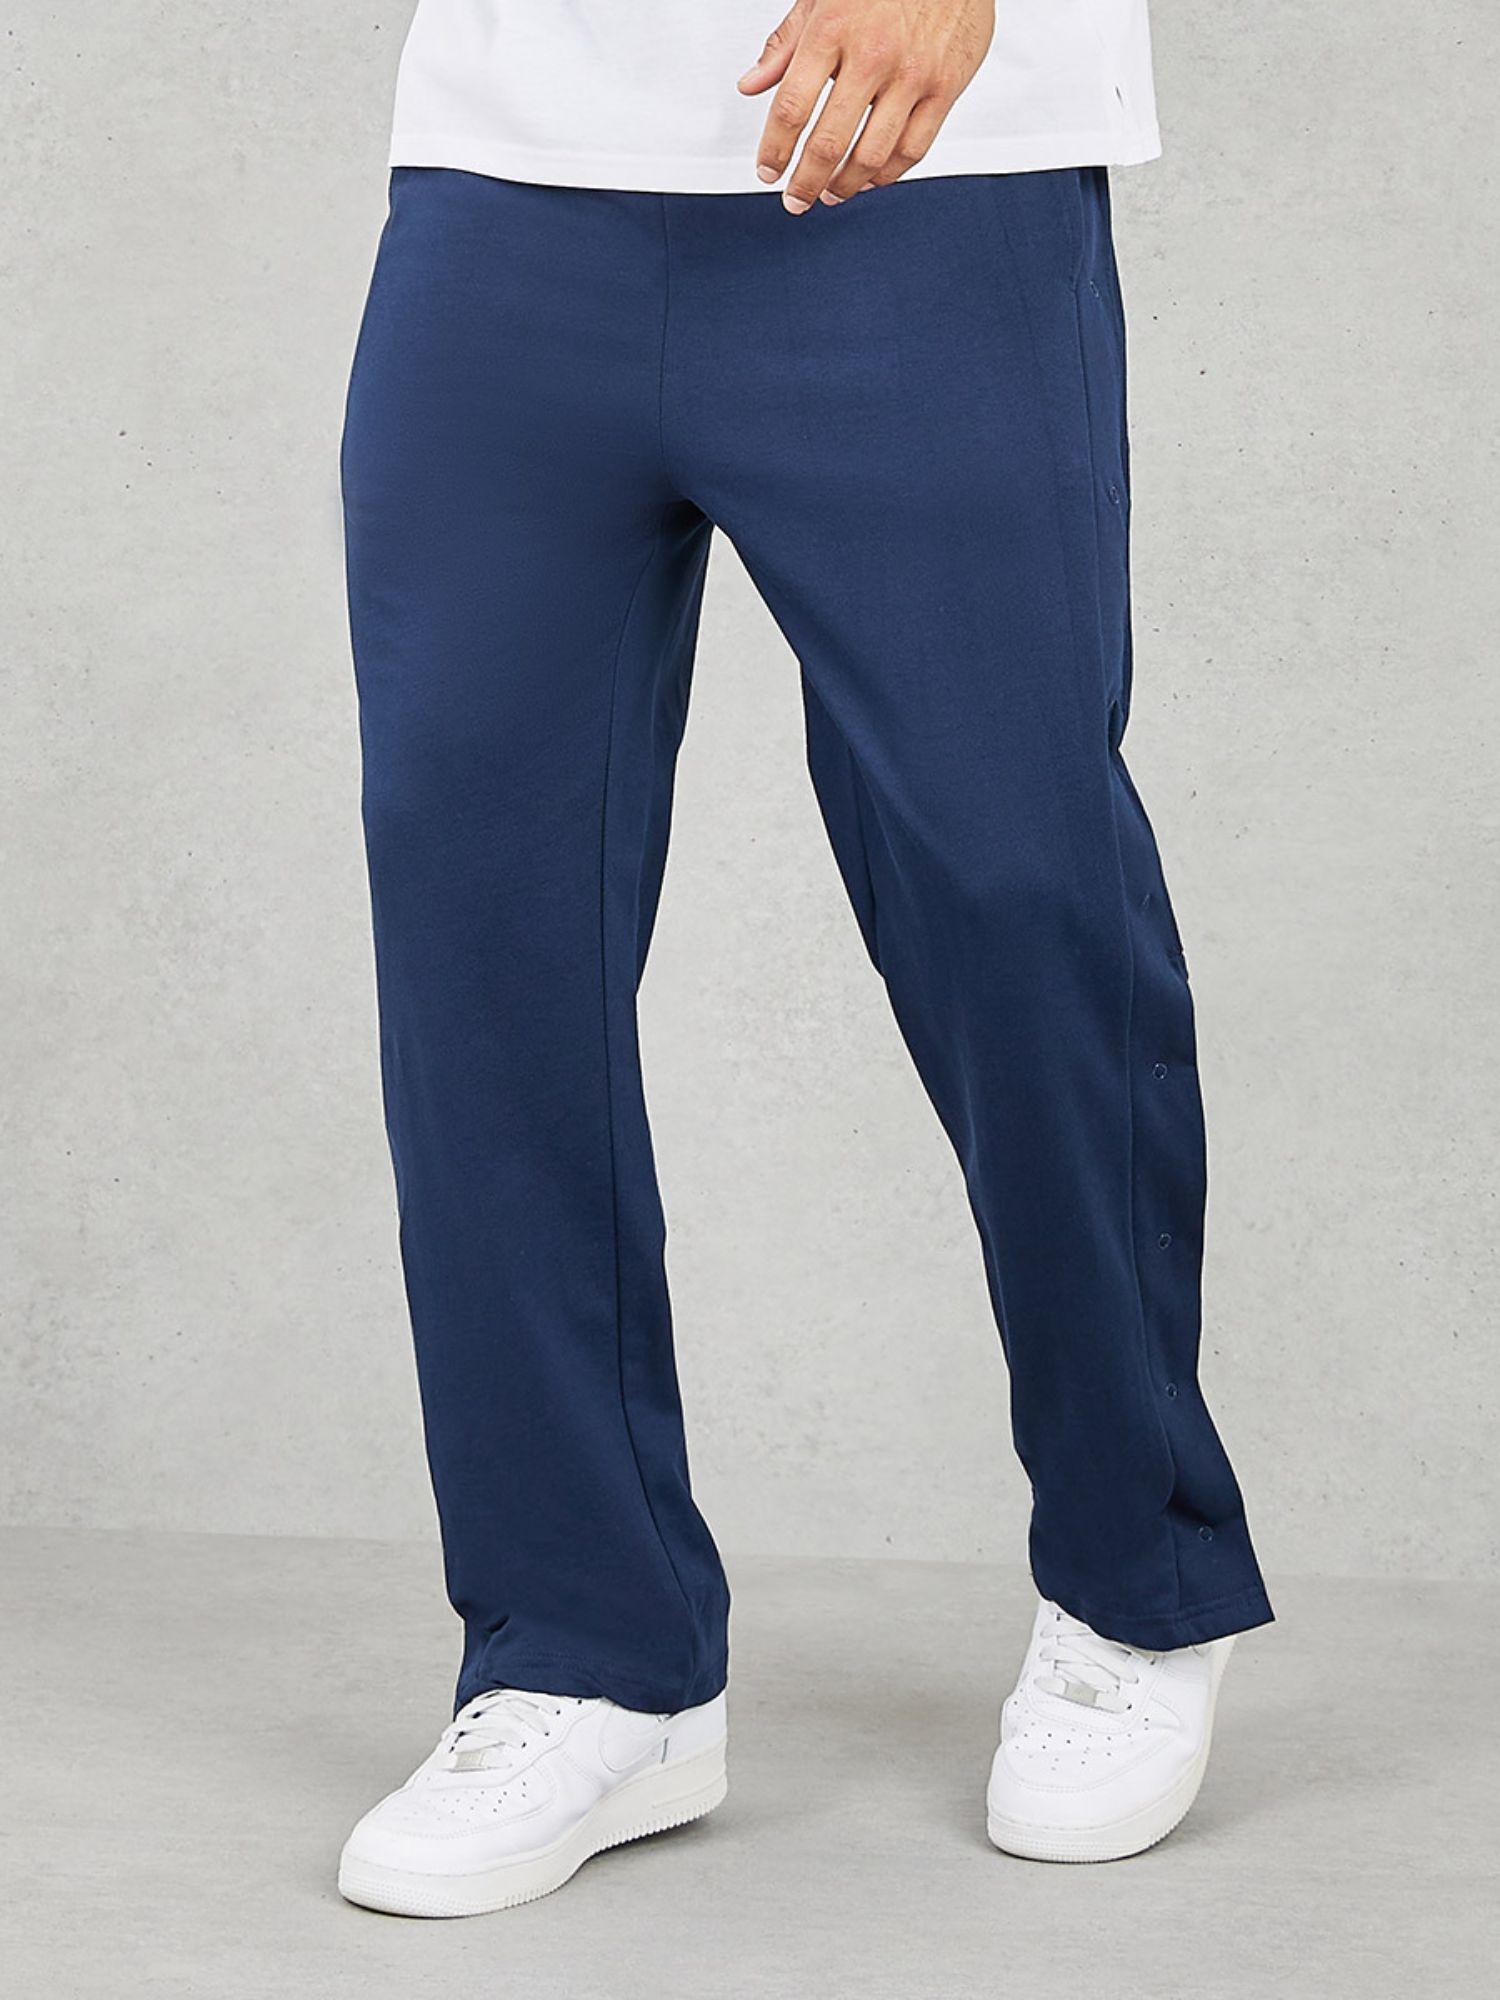 men's-navy-blue-cotton-oversized-straight-leg-jogger-with-popper-button